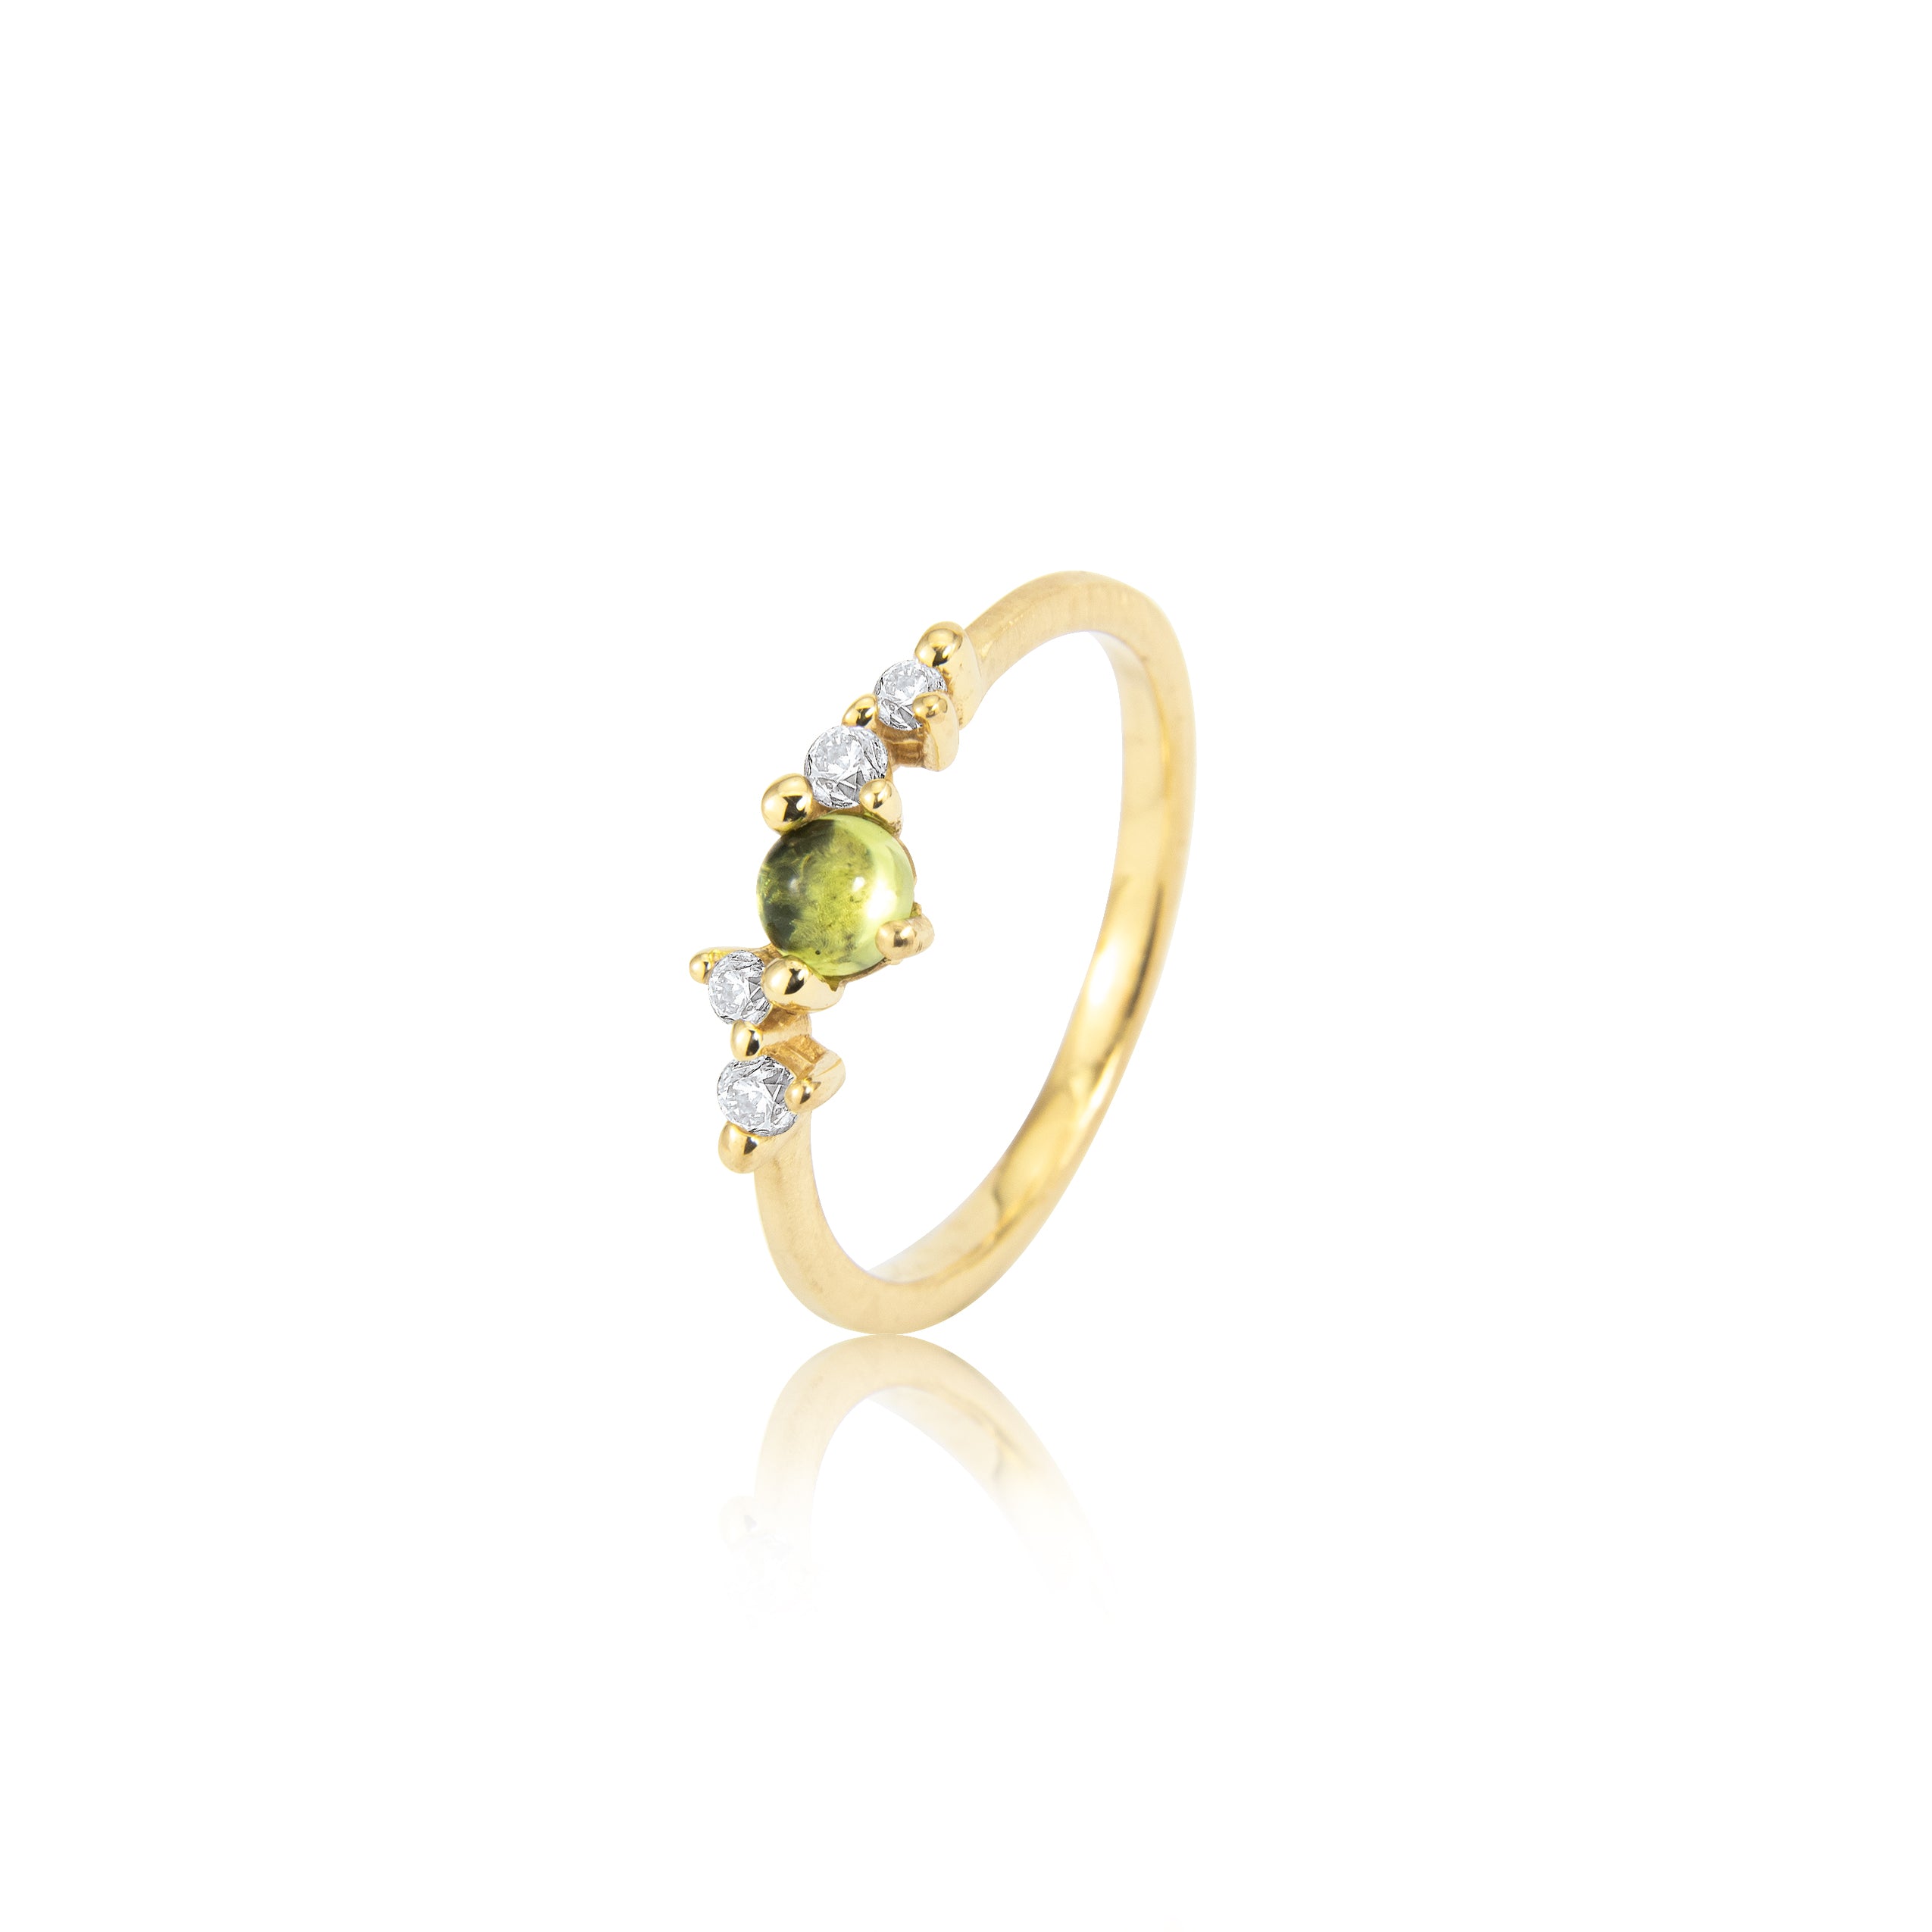 Stellini ring "smal" in 585/- gold with peridot